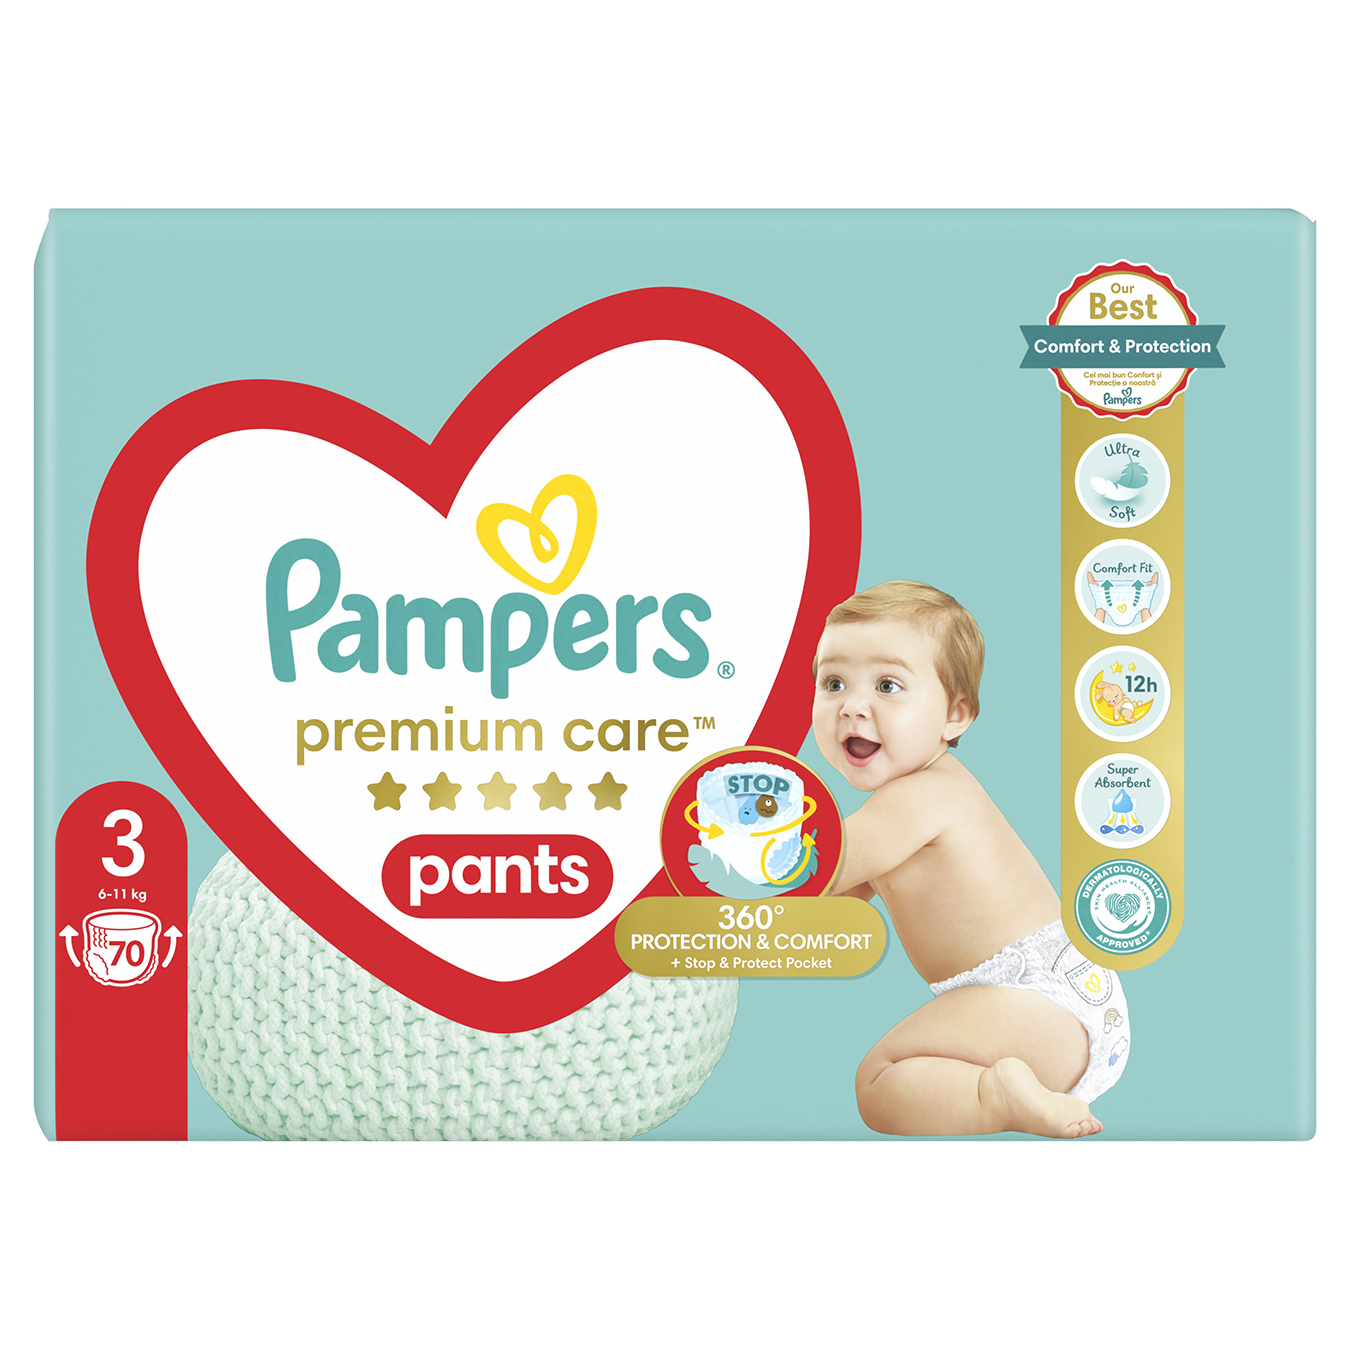 Pampers diapers-panties for children Premium Care Pants Midi 6-11 kg 70 pcs  ᐈ Buy at a good price from Novus